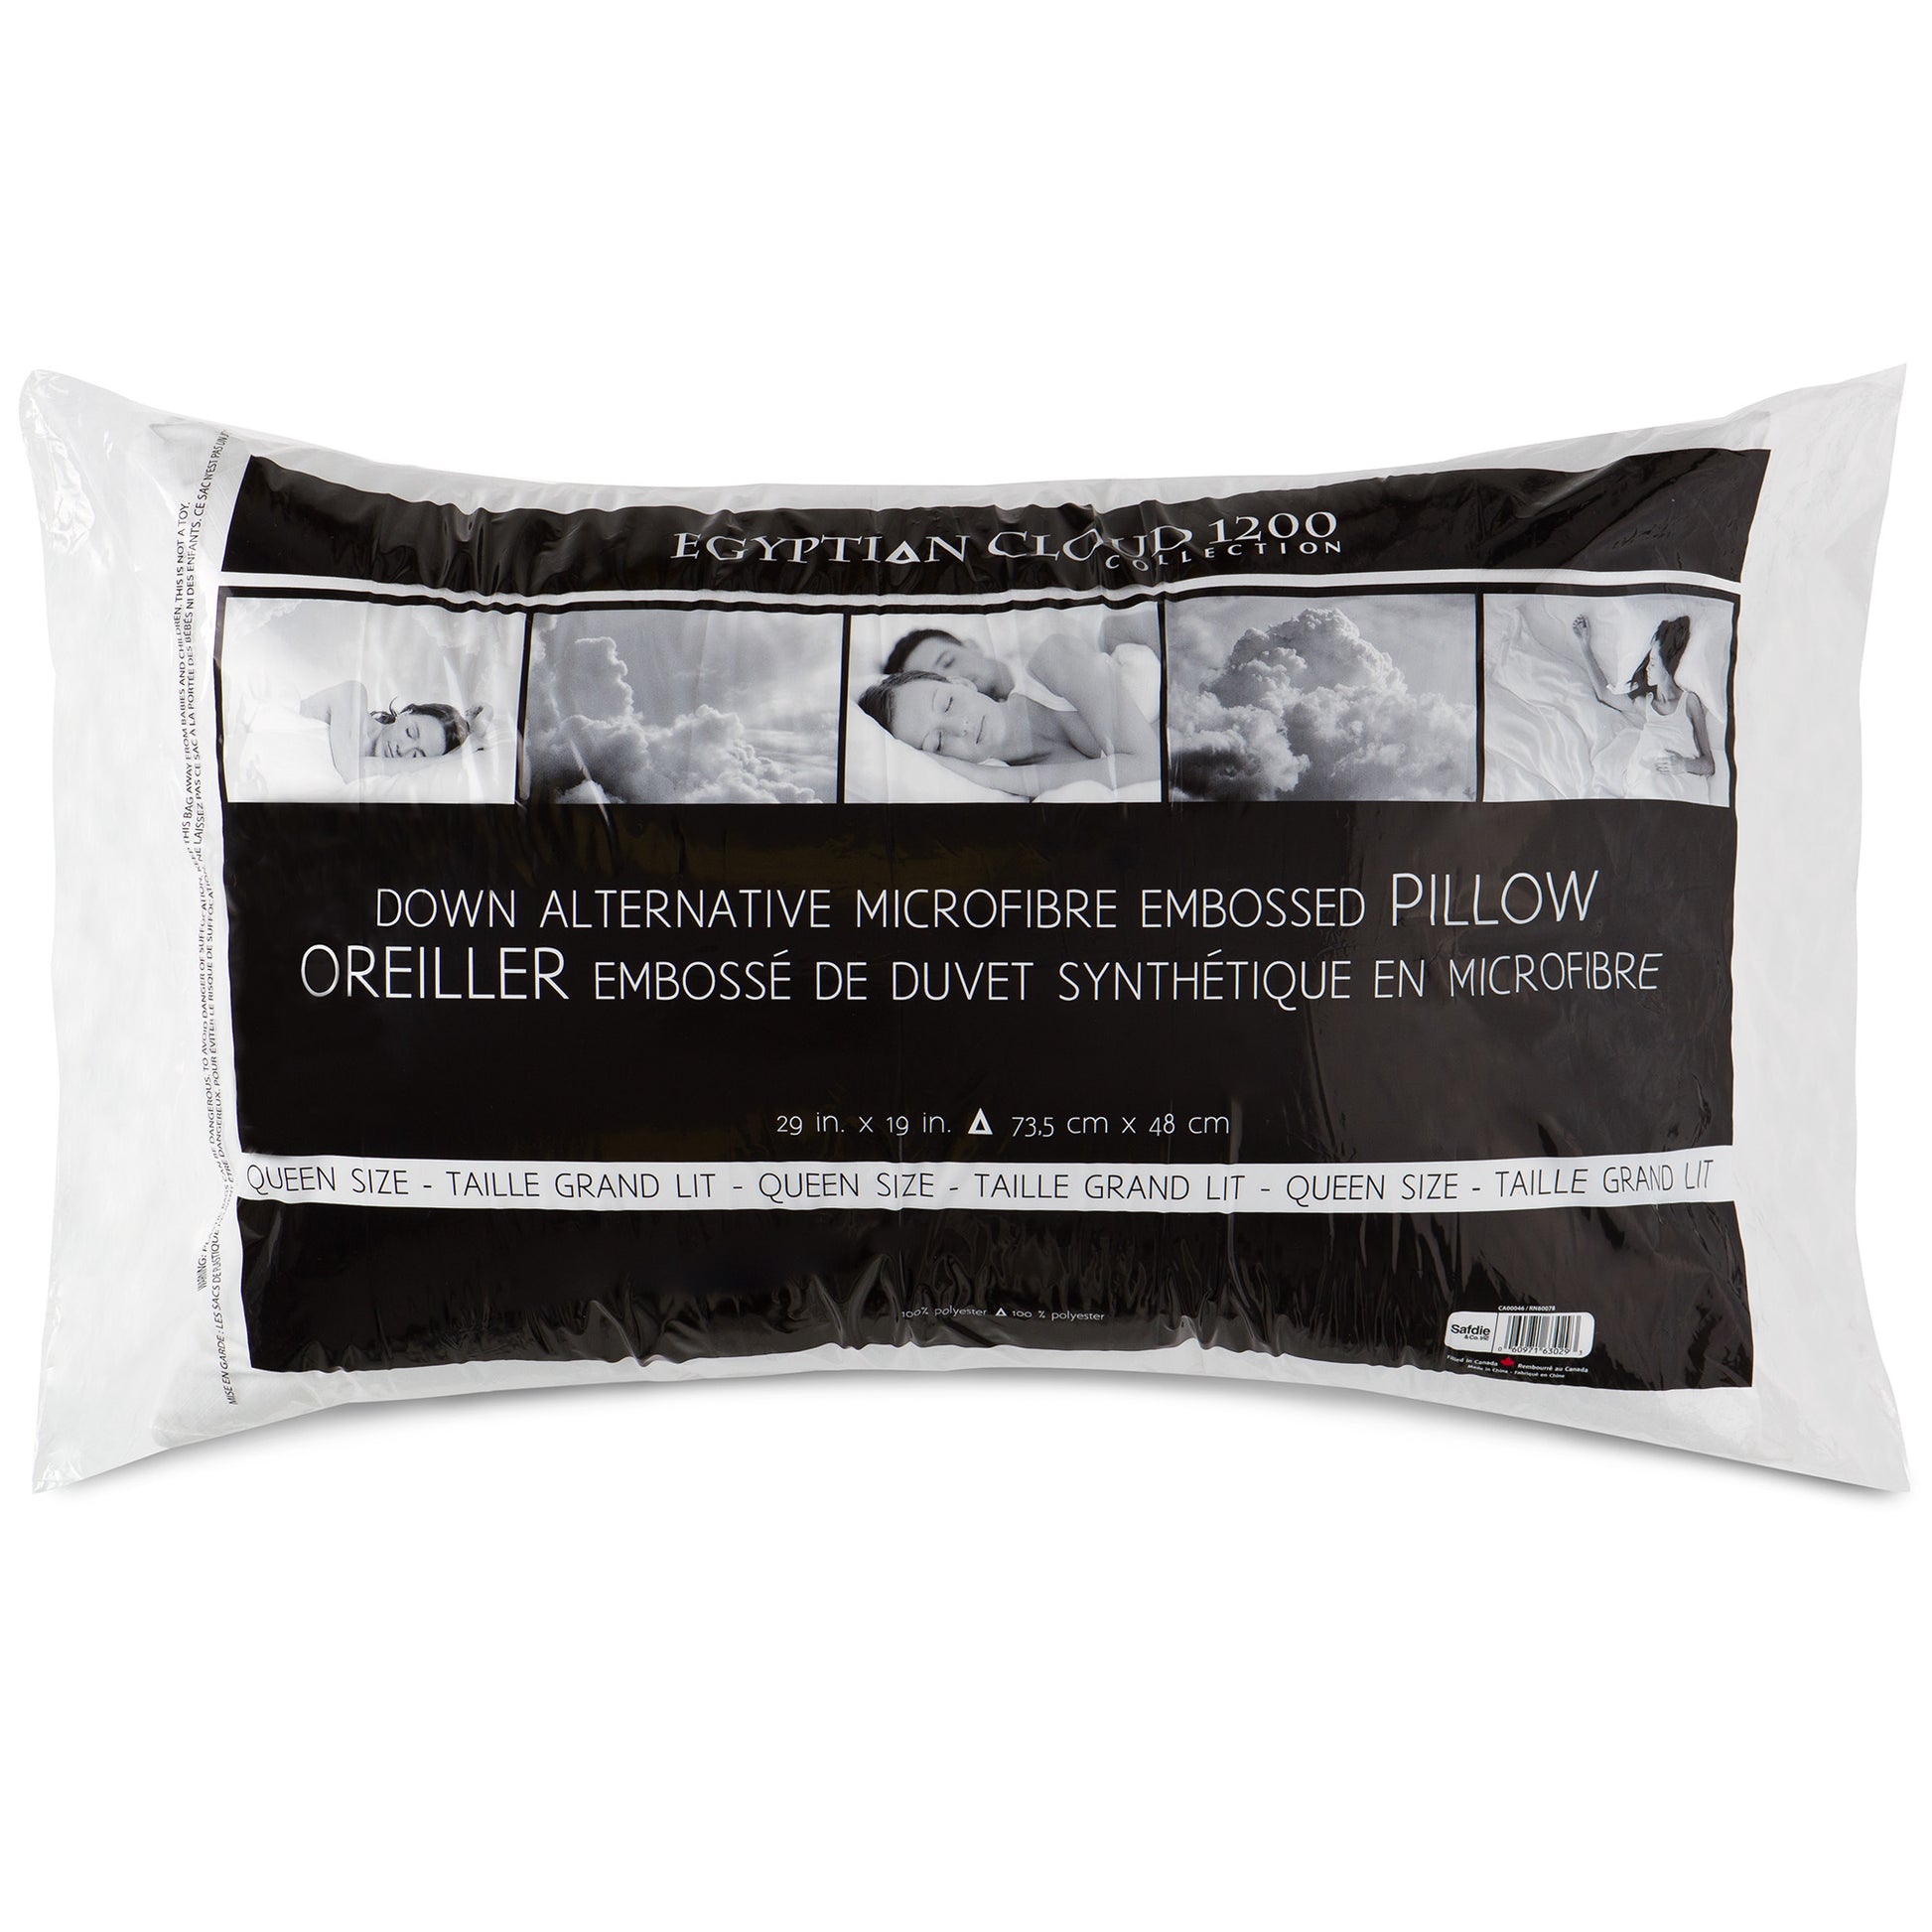 Woven Embossed Hotel Collection Bed Pillow, Queen Size. Designed for Back, Stomach or Side Sleepers, 20x30, White